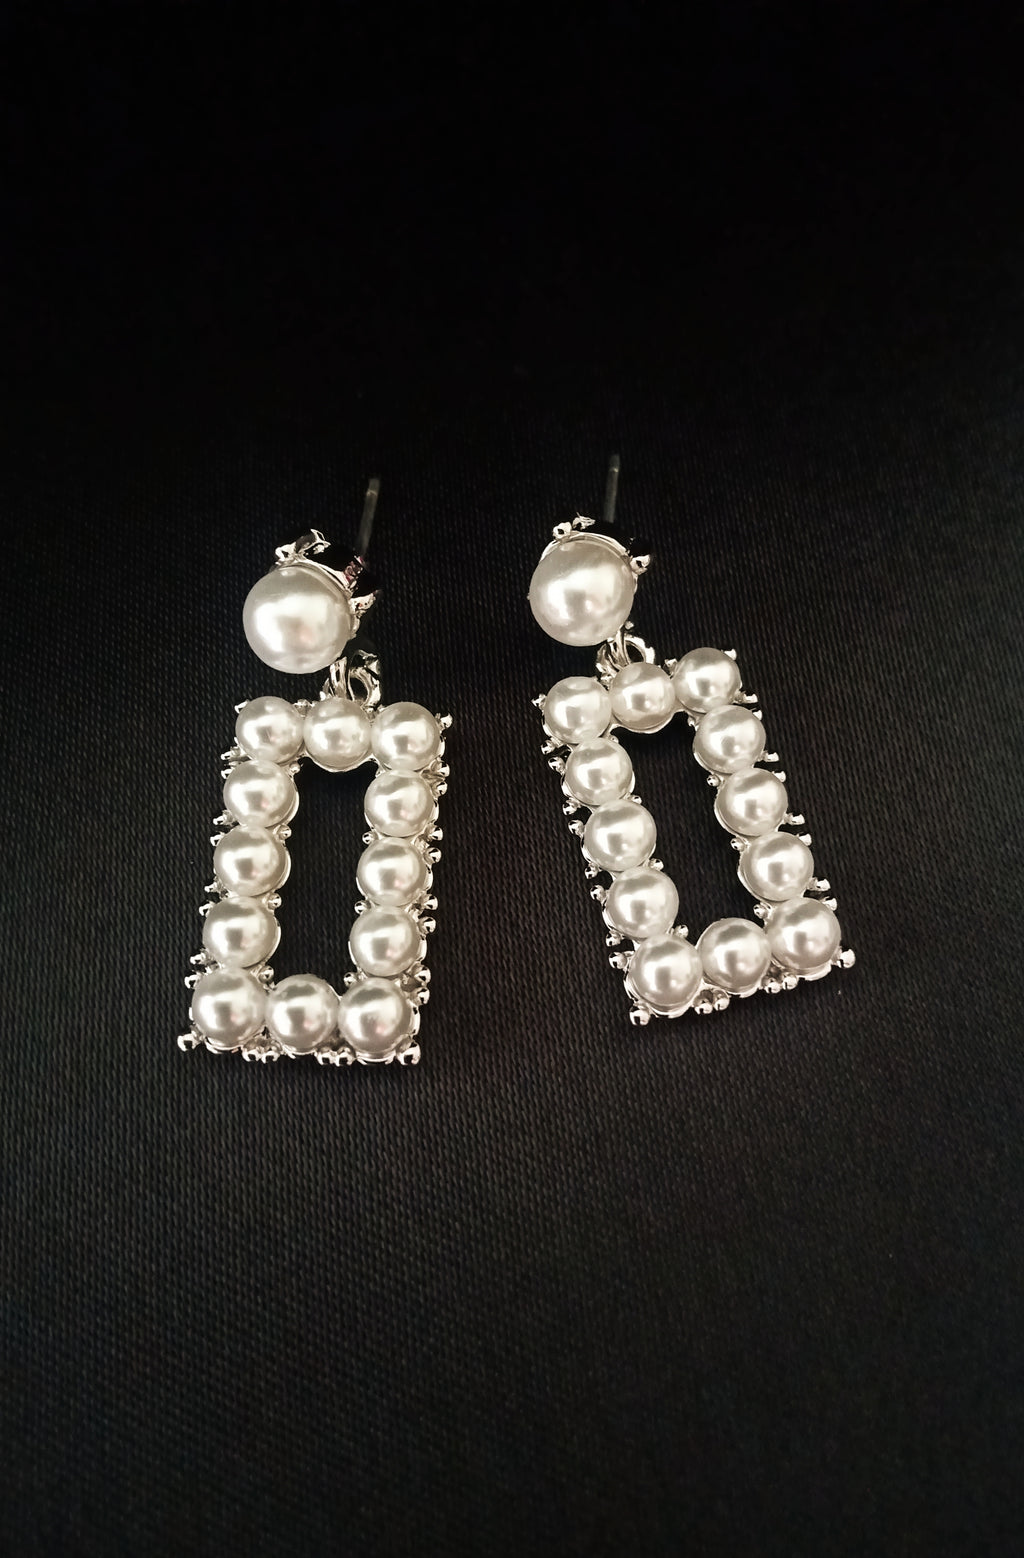 E0704_Trendy rectangular shaped danglers embellished with pearls.